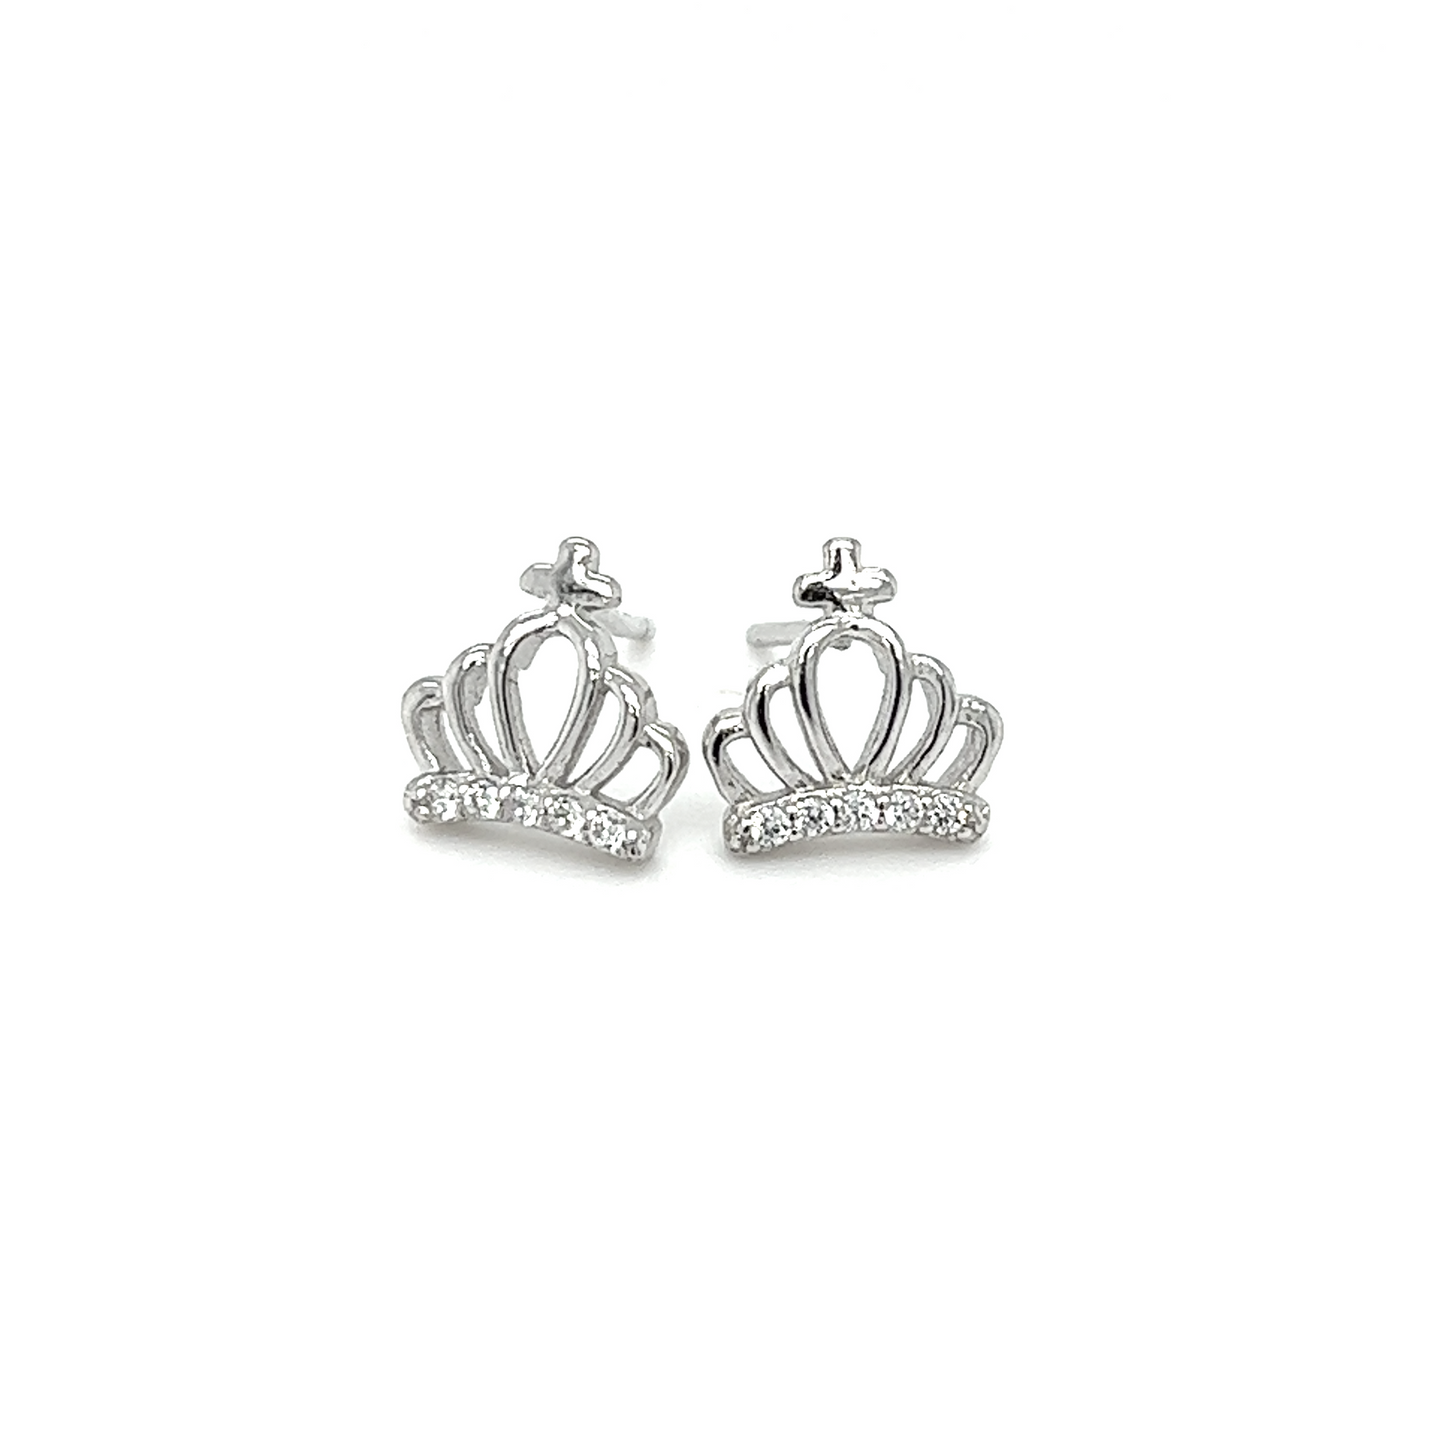 A pair of Super Silver Crown CZ Studs with diamonds.